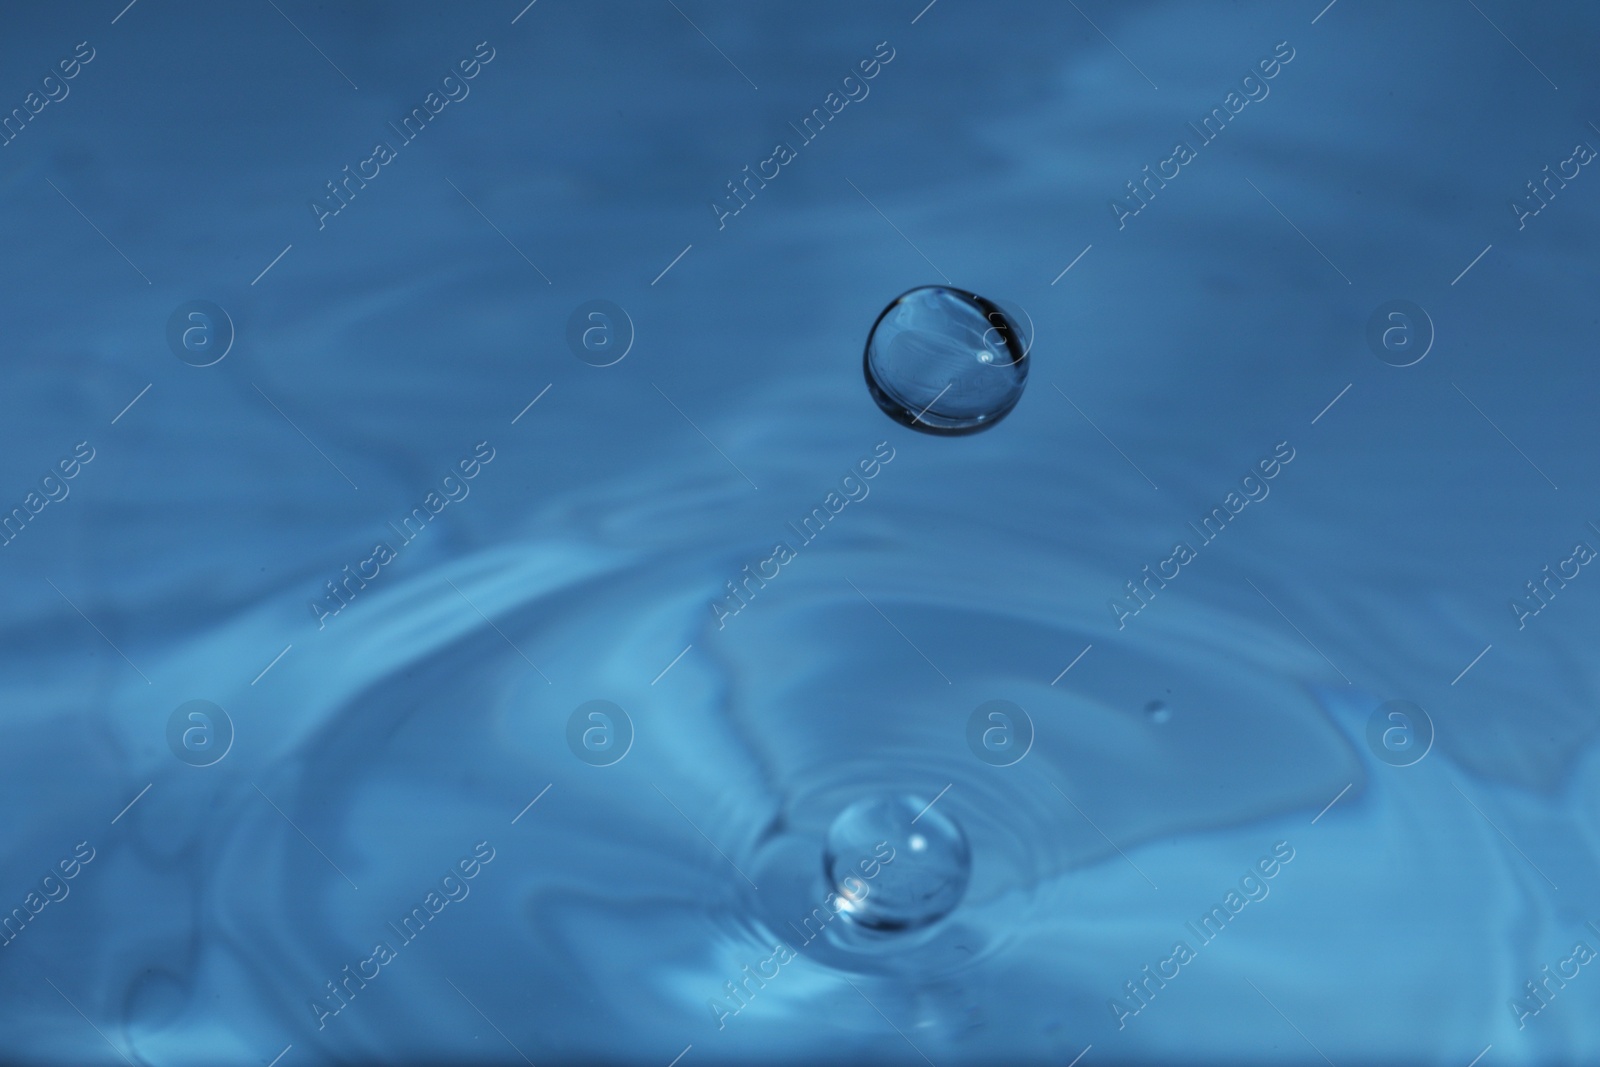 Photo of Drop falling into water on blue background, macro view. Space for text